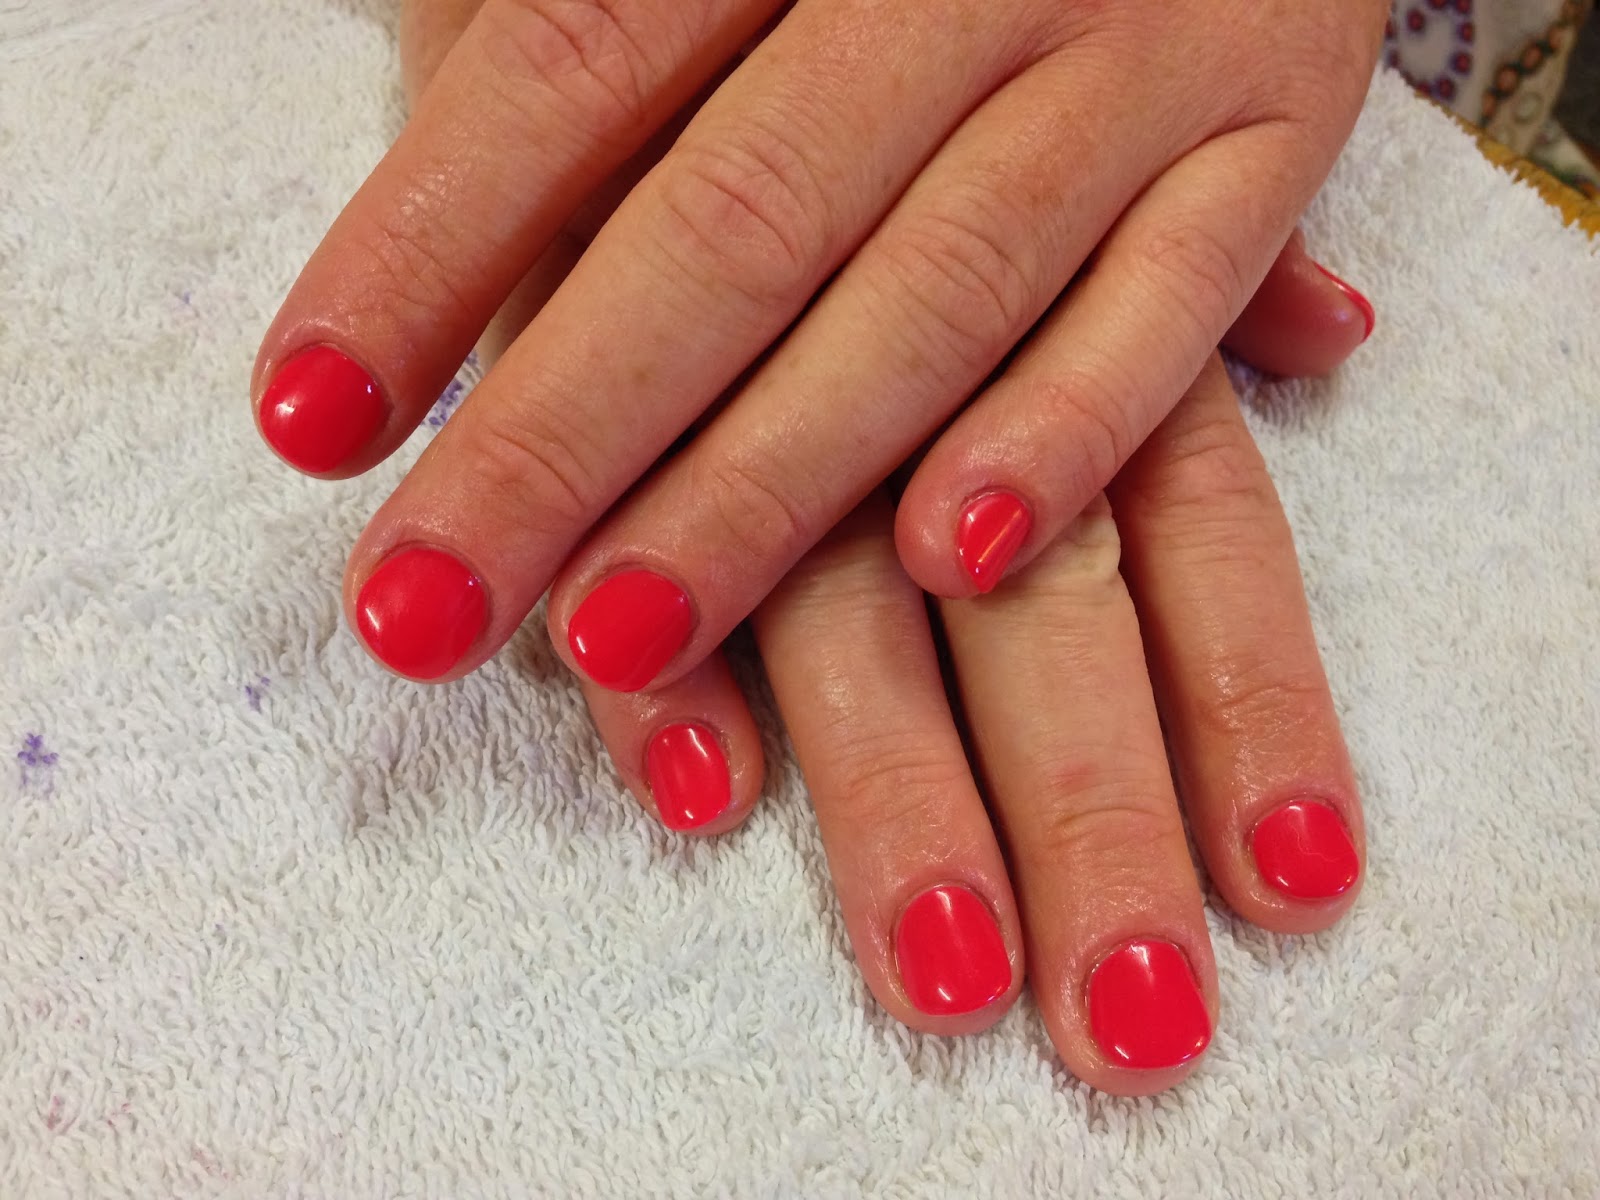 3. CND Shellac in "Lobster Roll" - wide 2